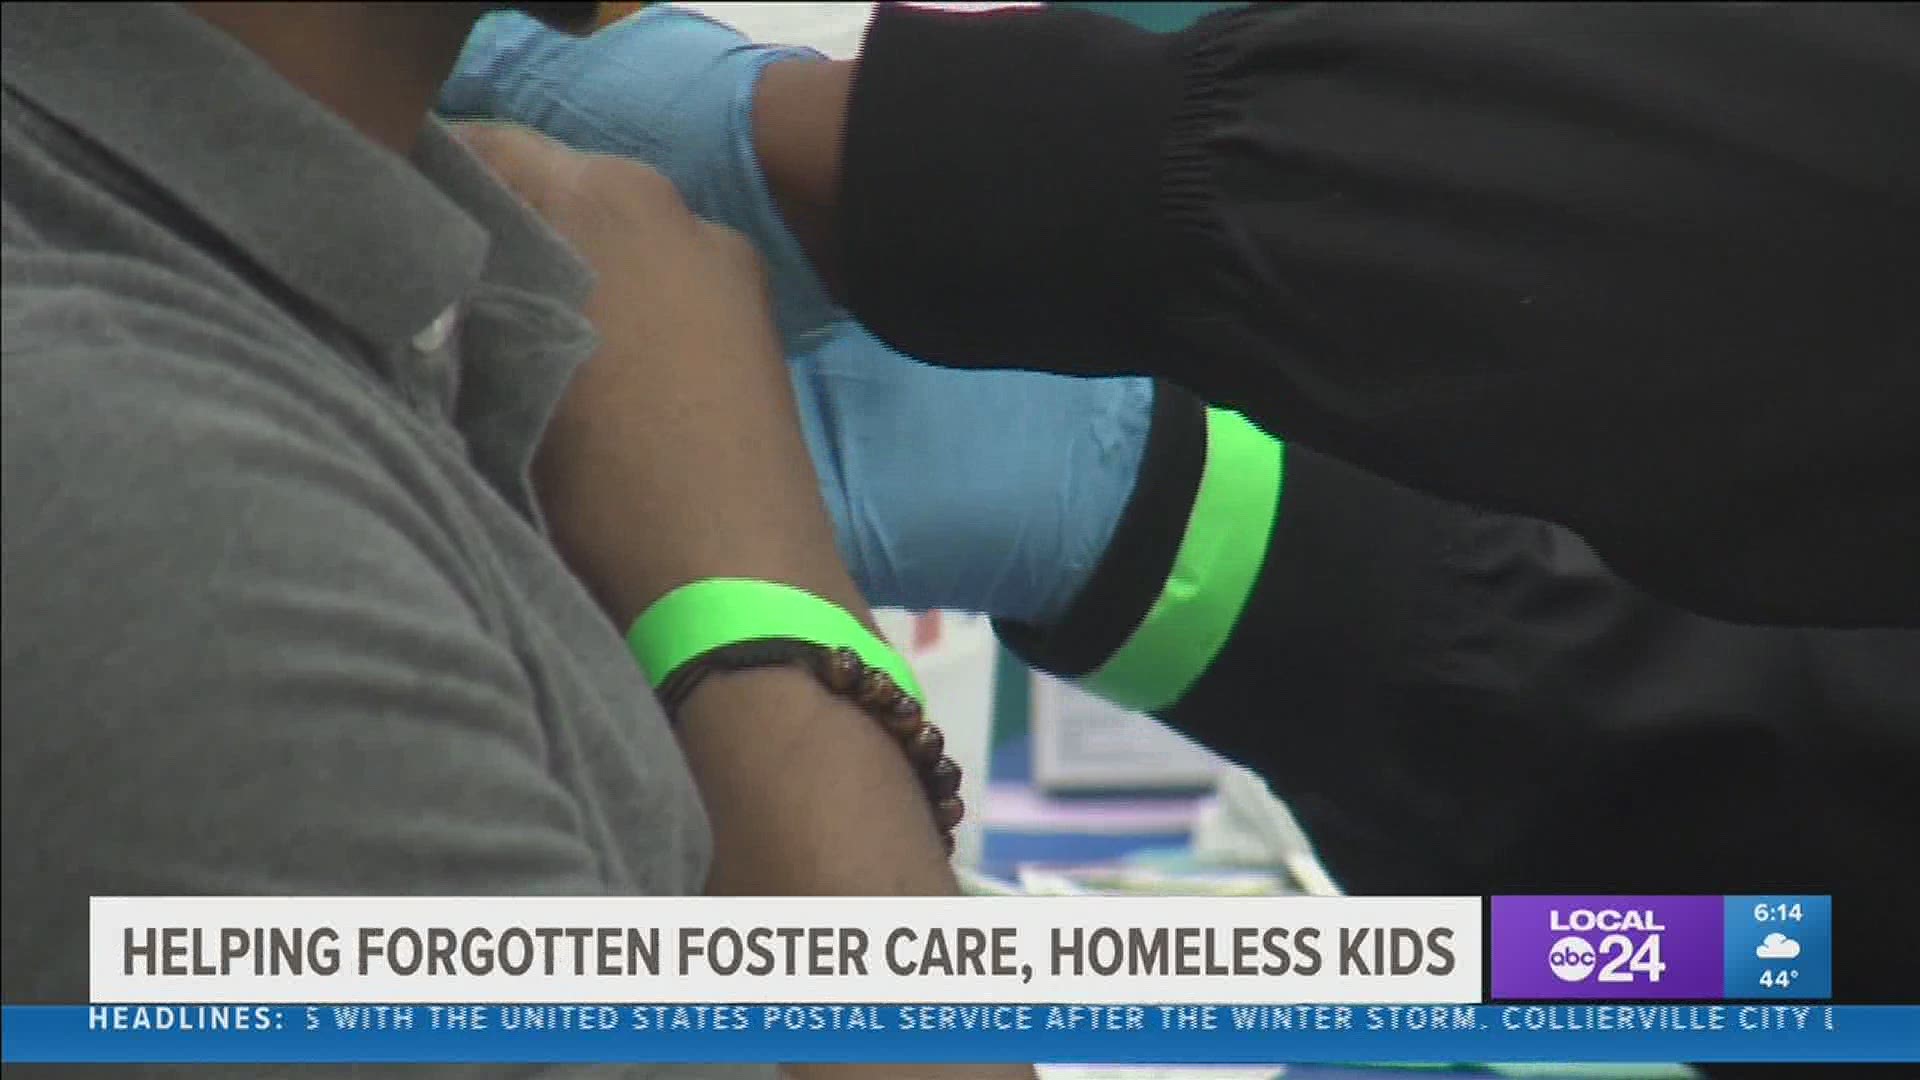 Homeless children and foster children who must maneuver through the school process are often overlooked.